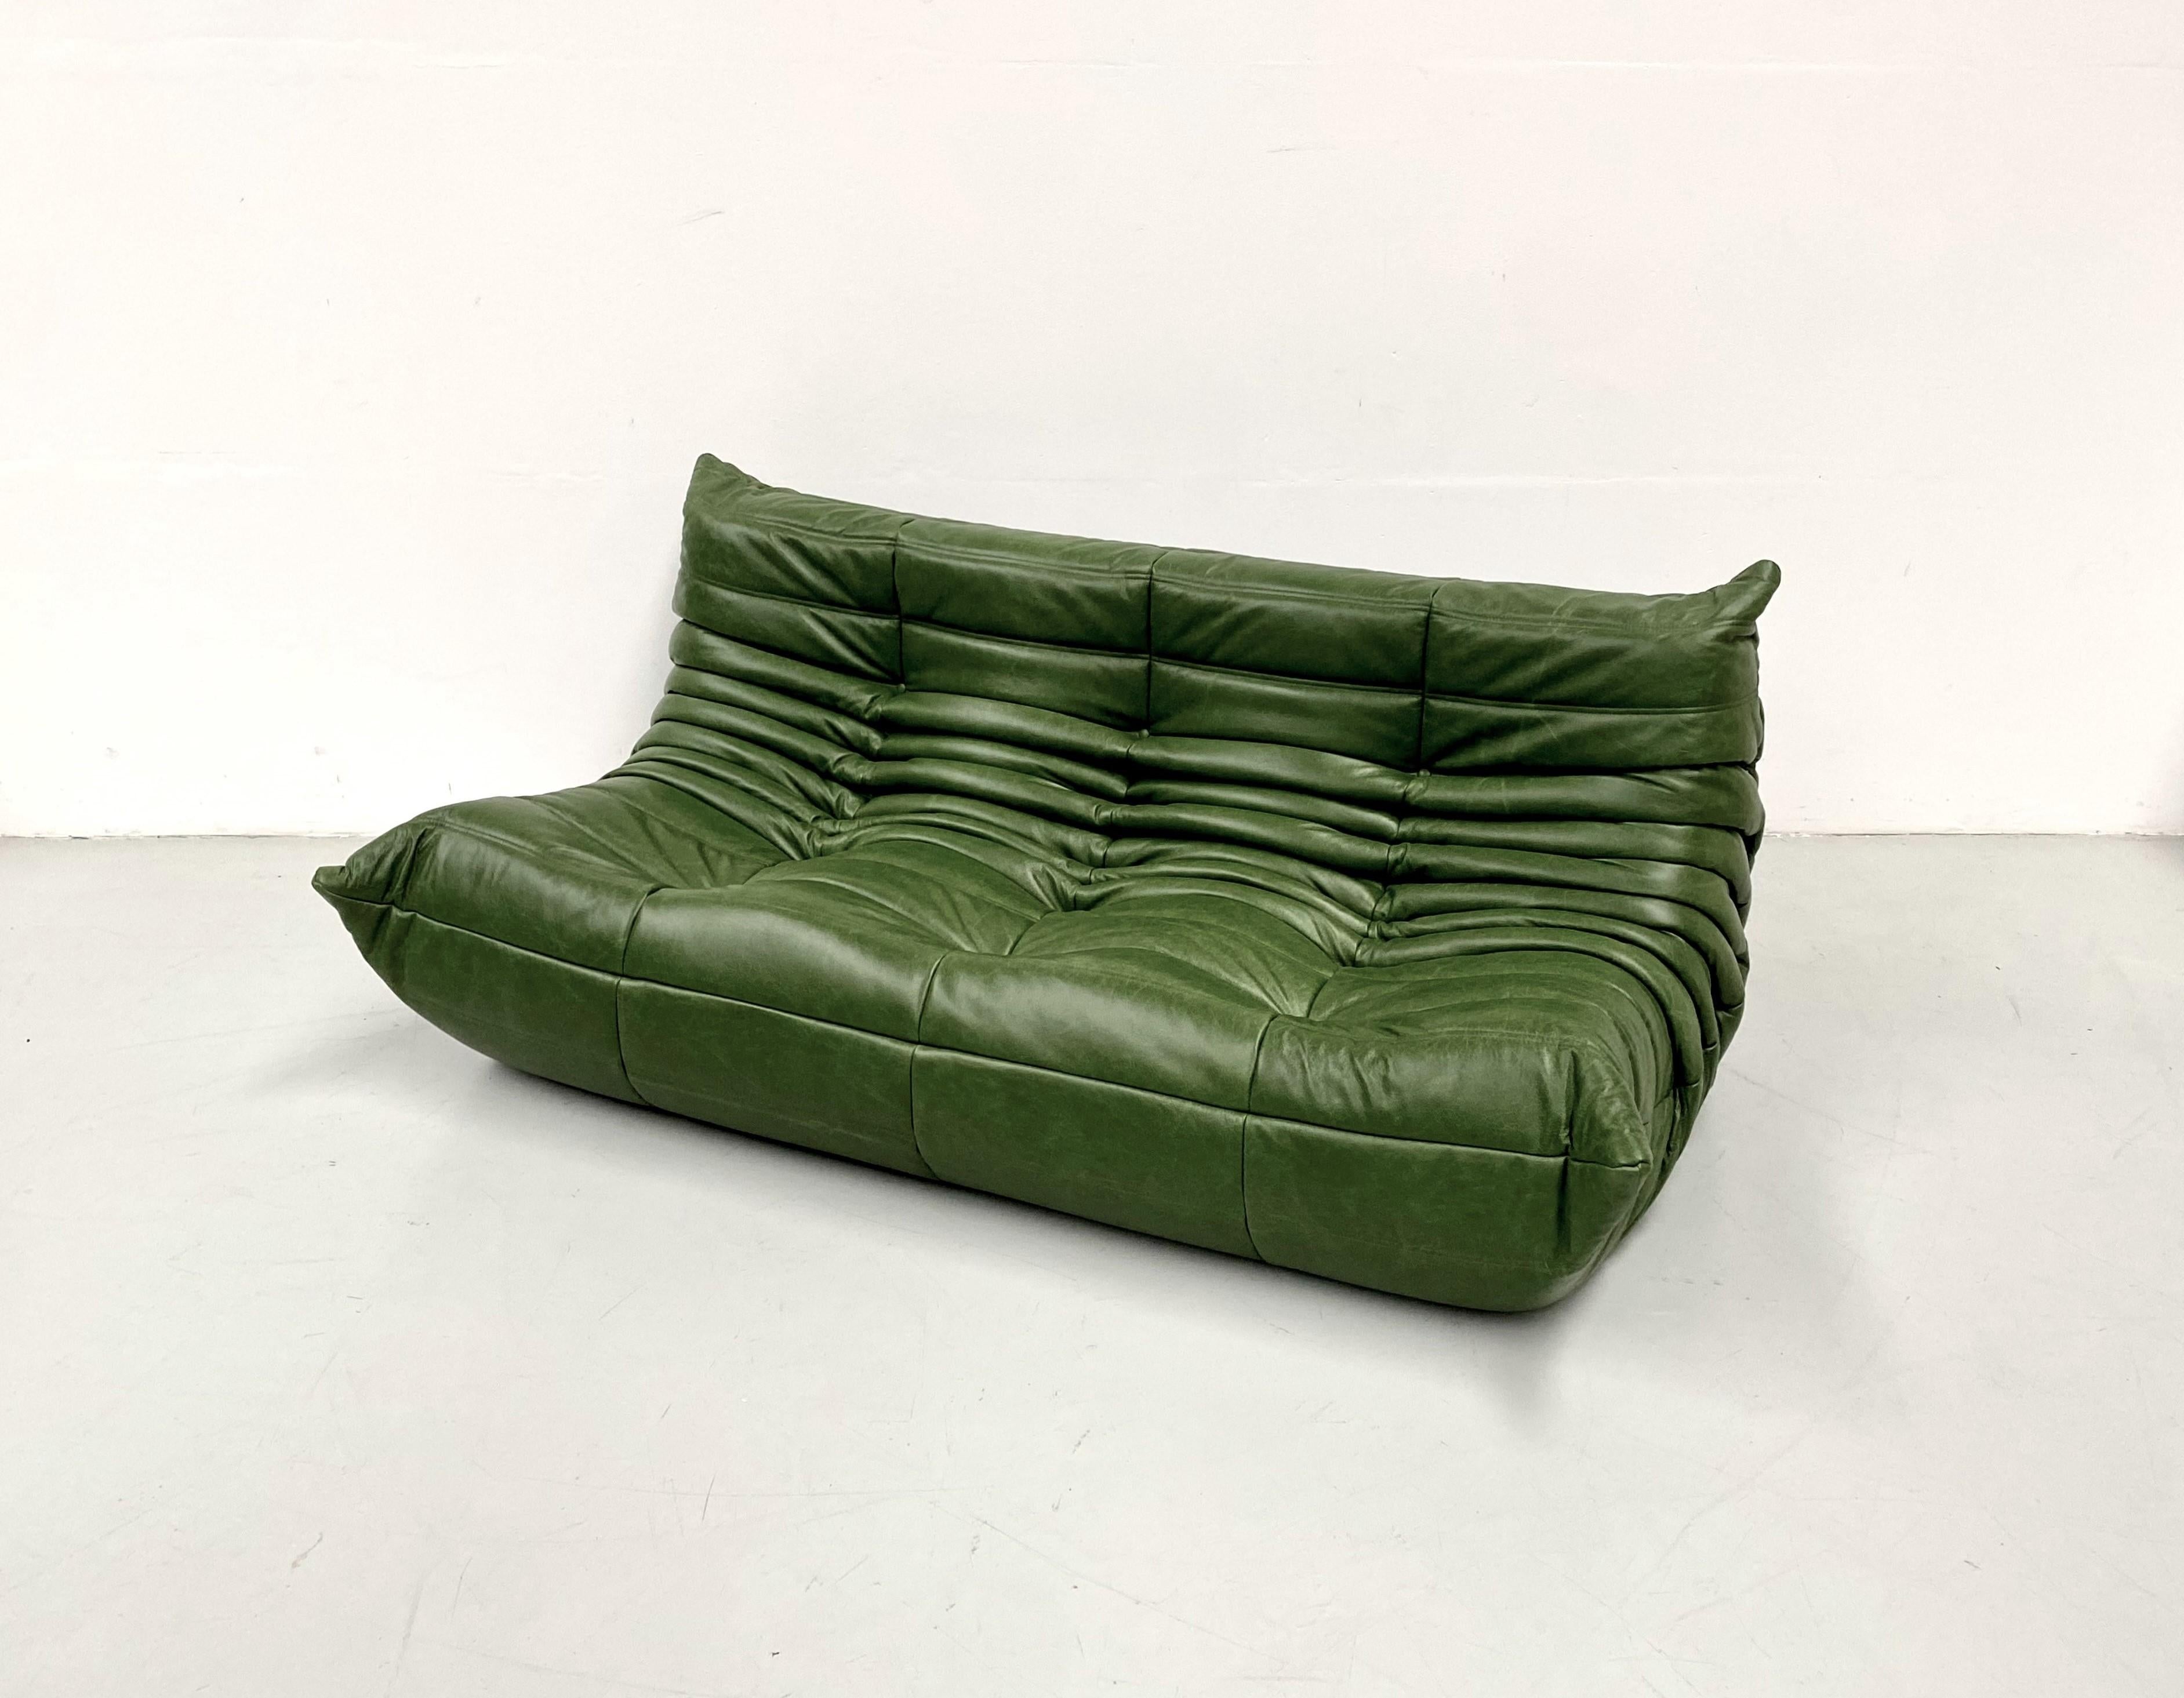 20th Century Vintage French Togo Sofa in Forest Green Leather by M. Ducaroy for Ligne Roset